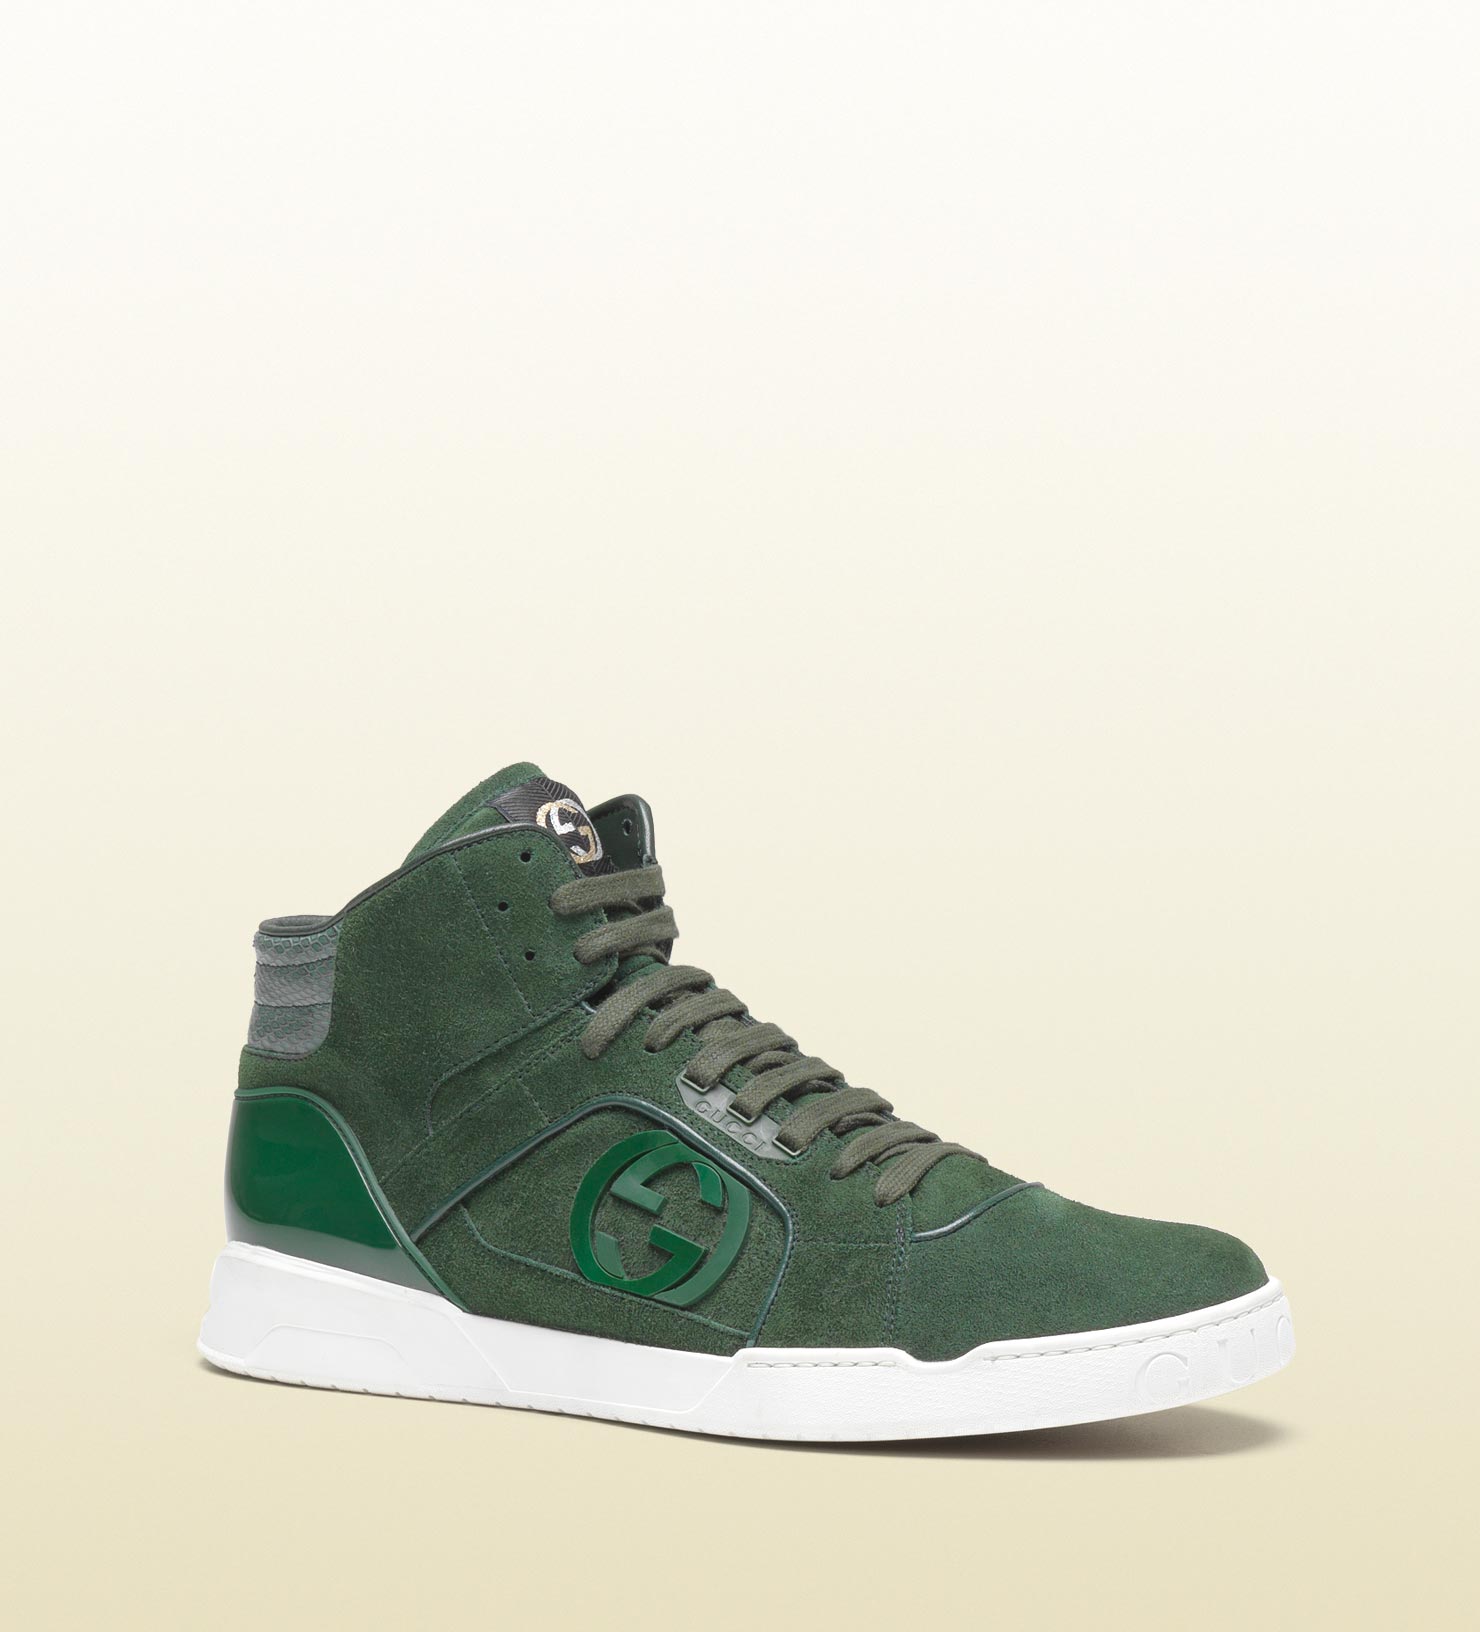 Gucci Hitop Sneaker with Interlocking G Detail in Green for Men - Lyst